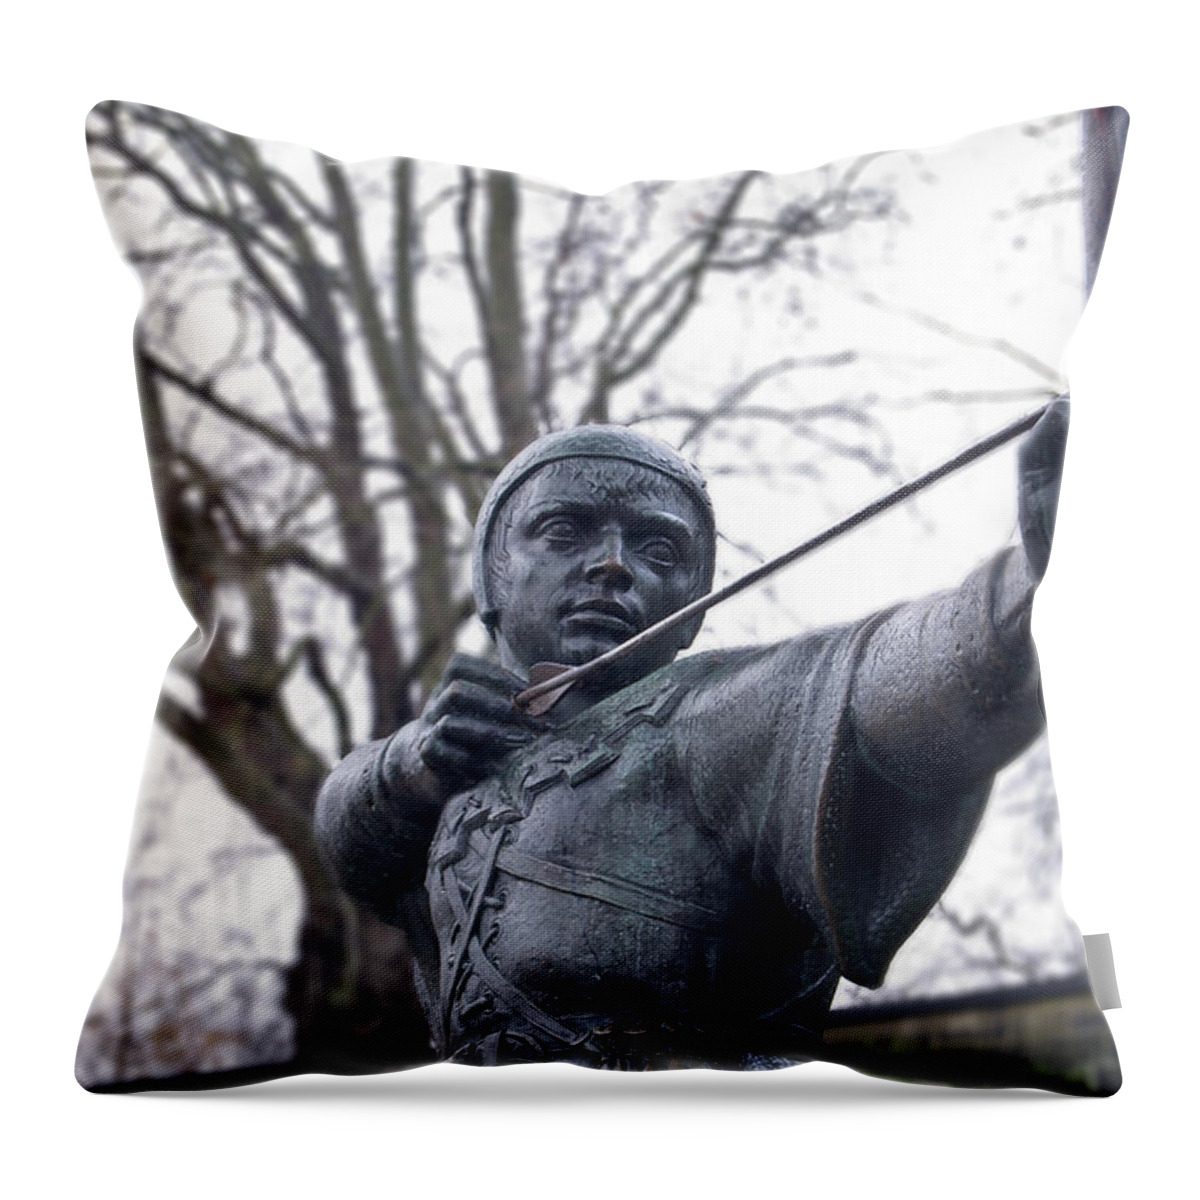  Throw Pillow featuring the photograph Lwv10048 by Lee Winter